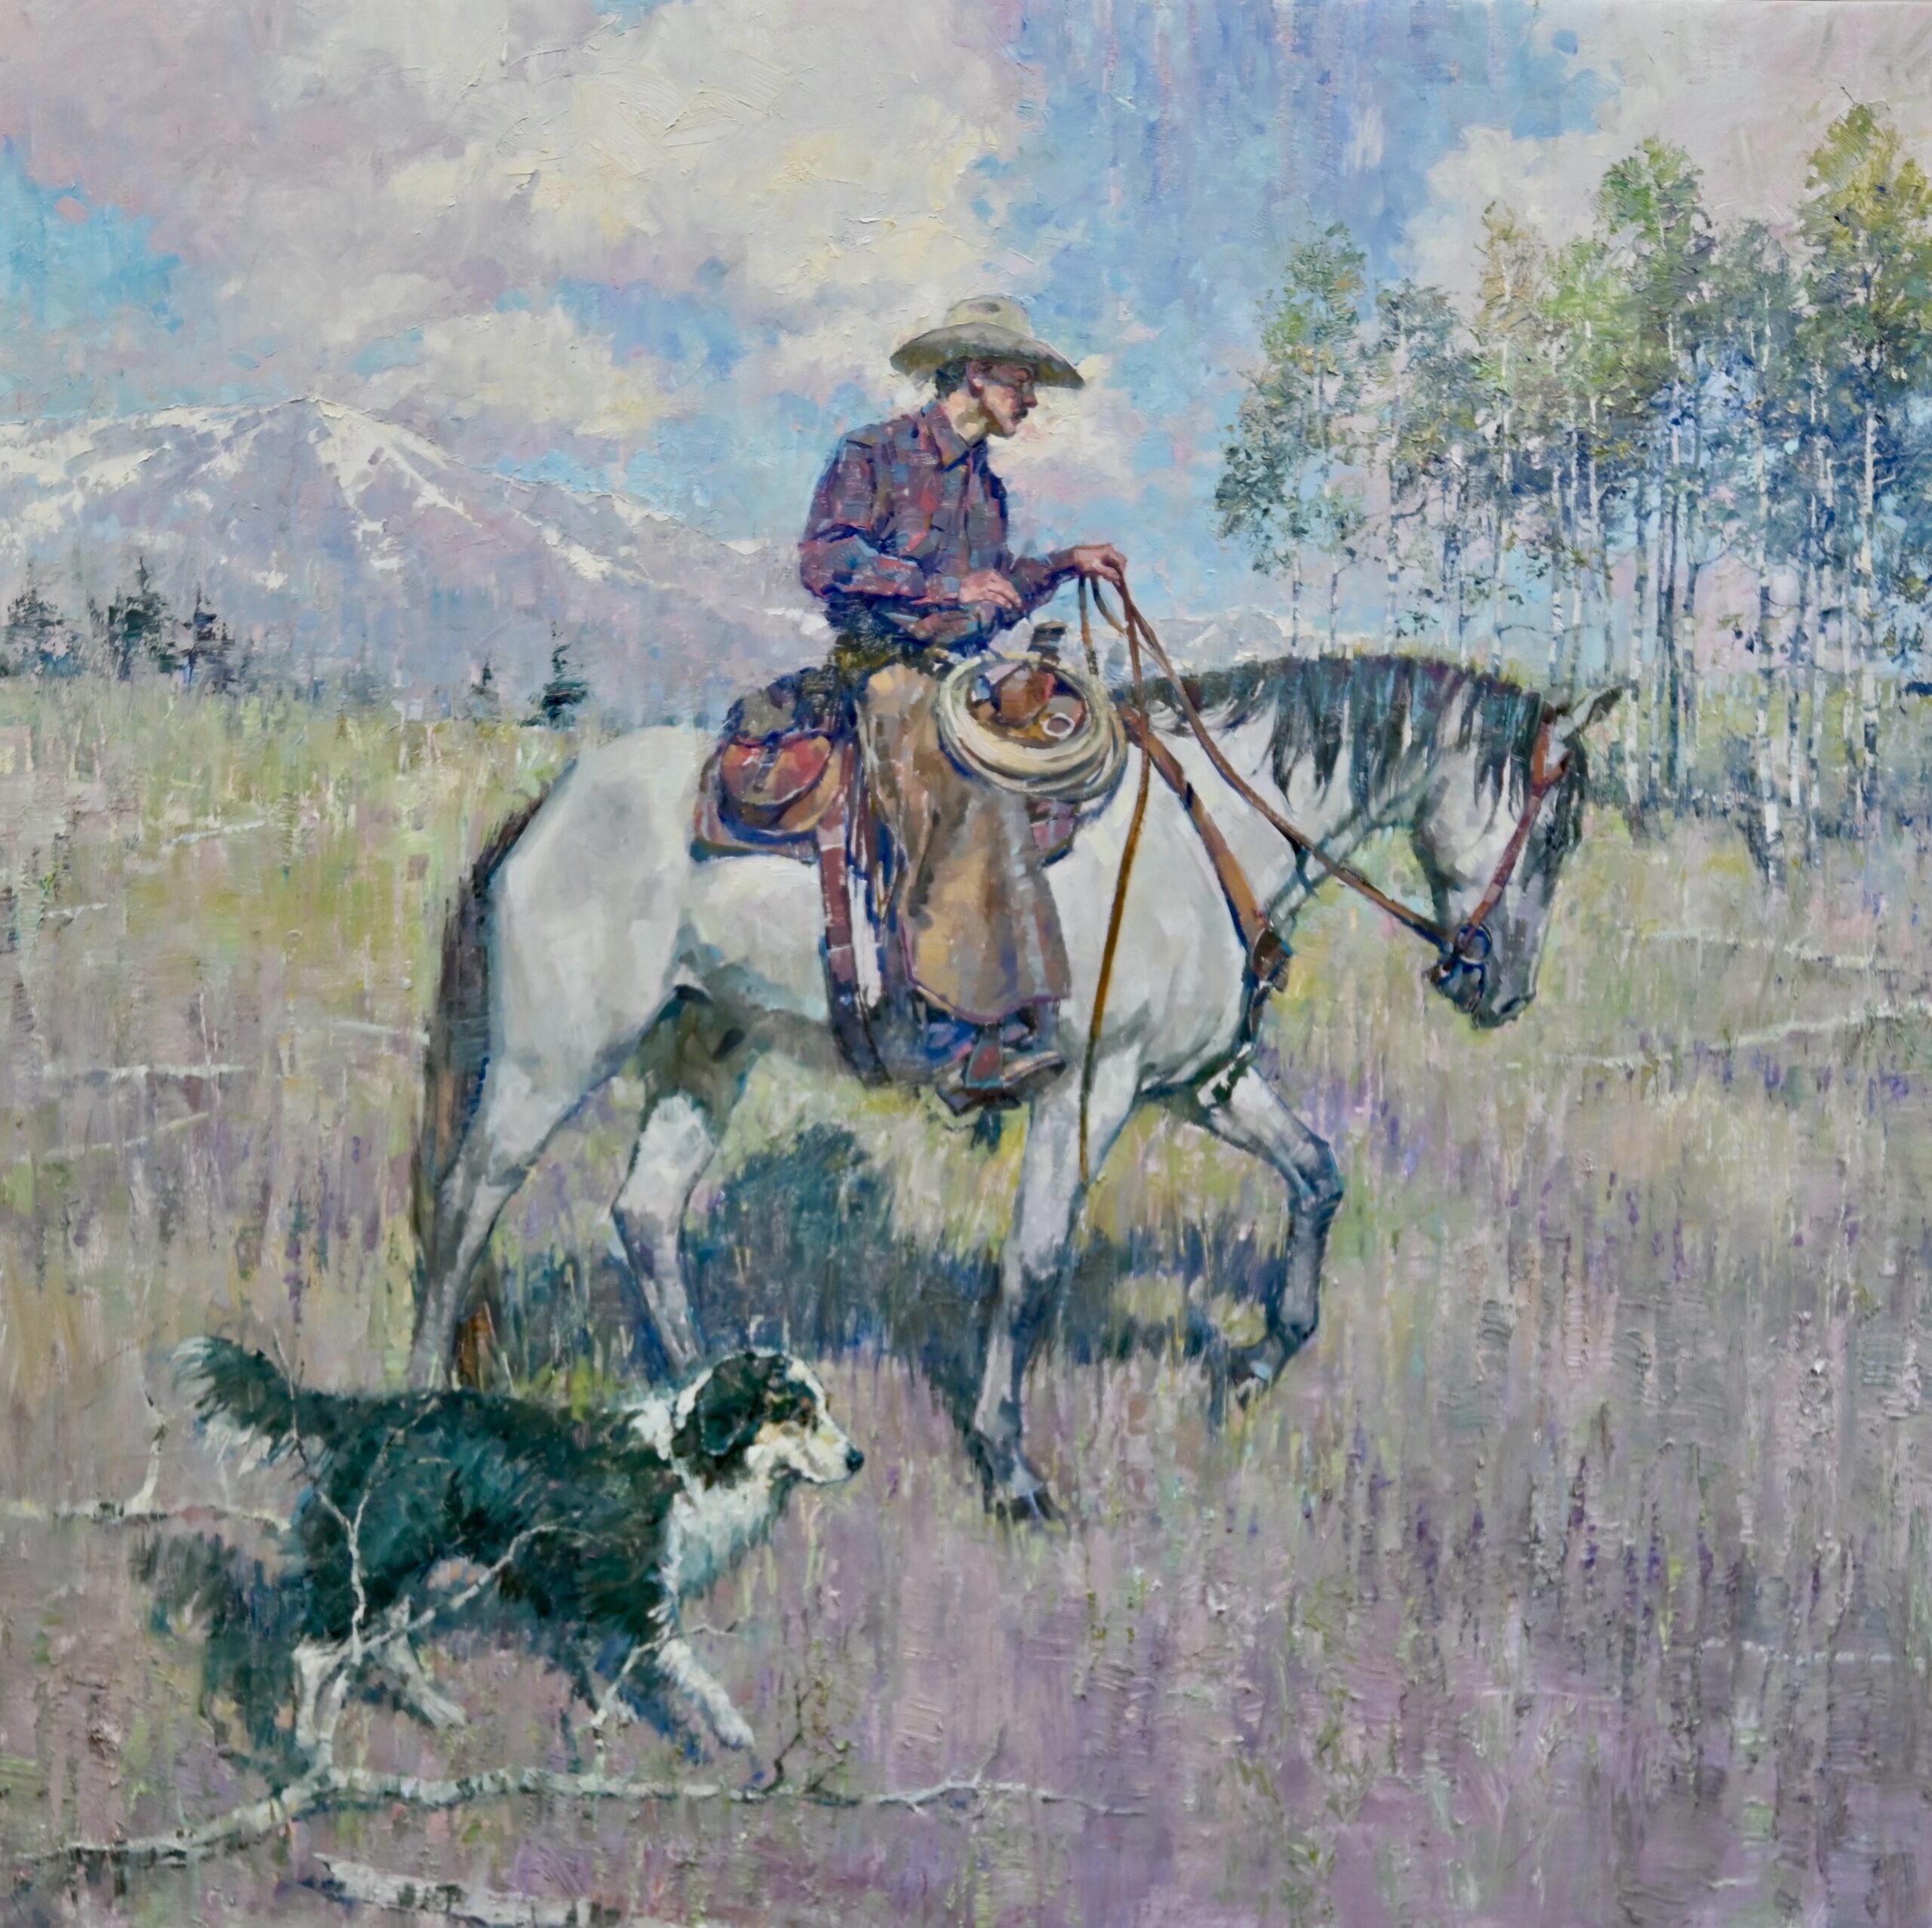 painting of a cowboy on horseback walking along with his dog